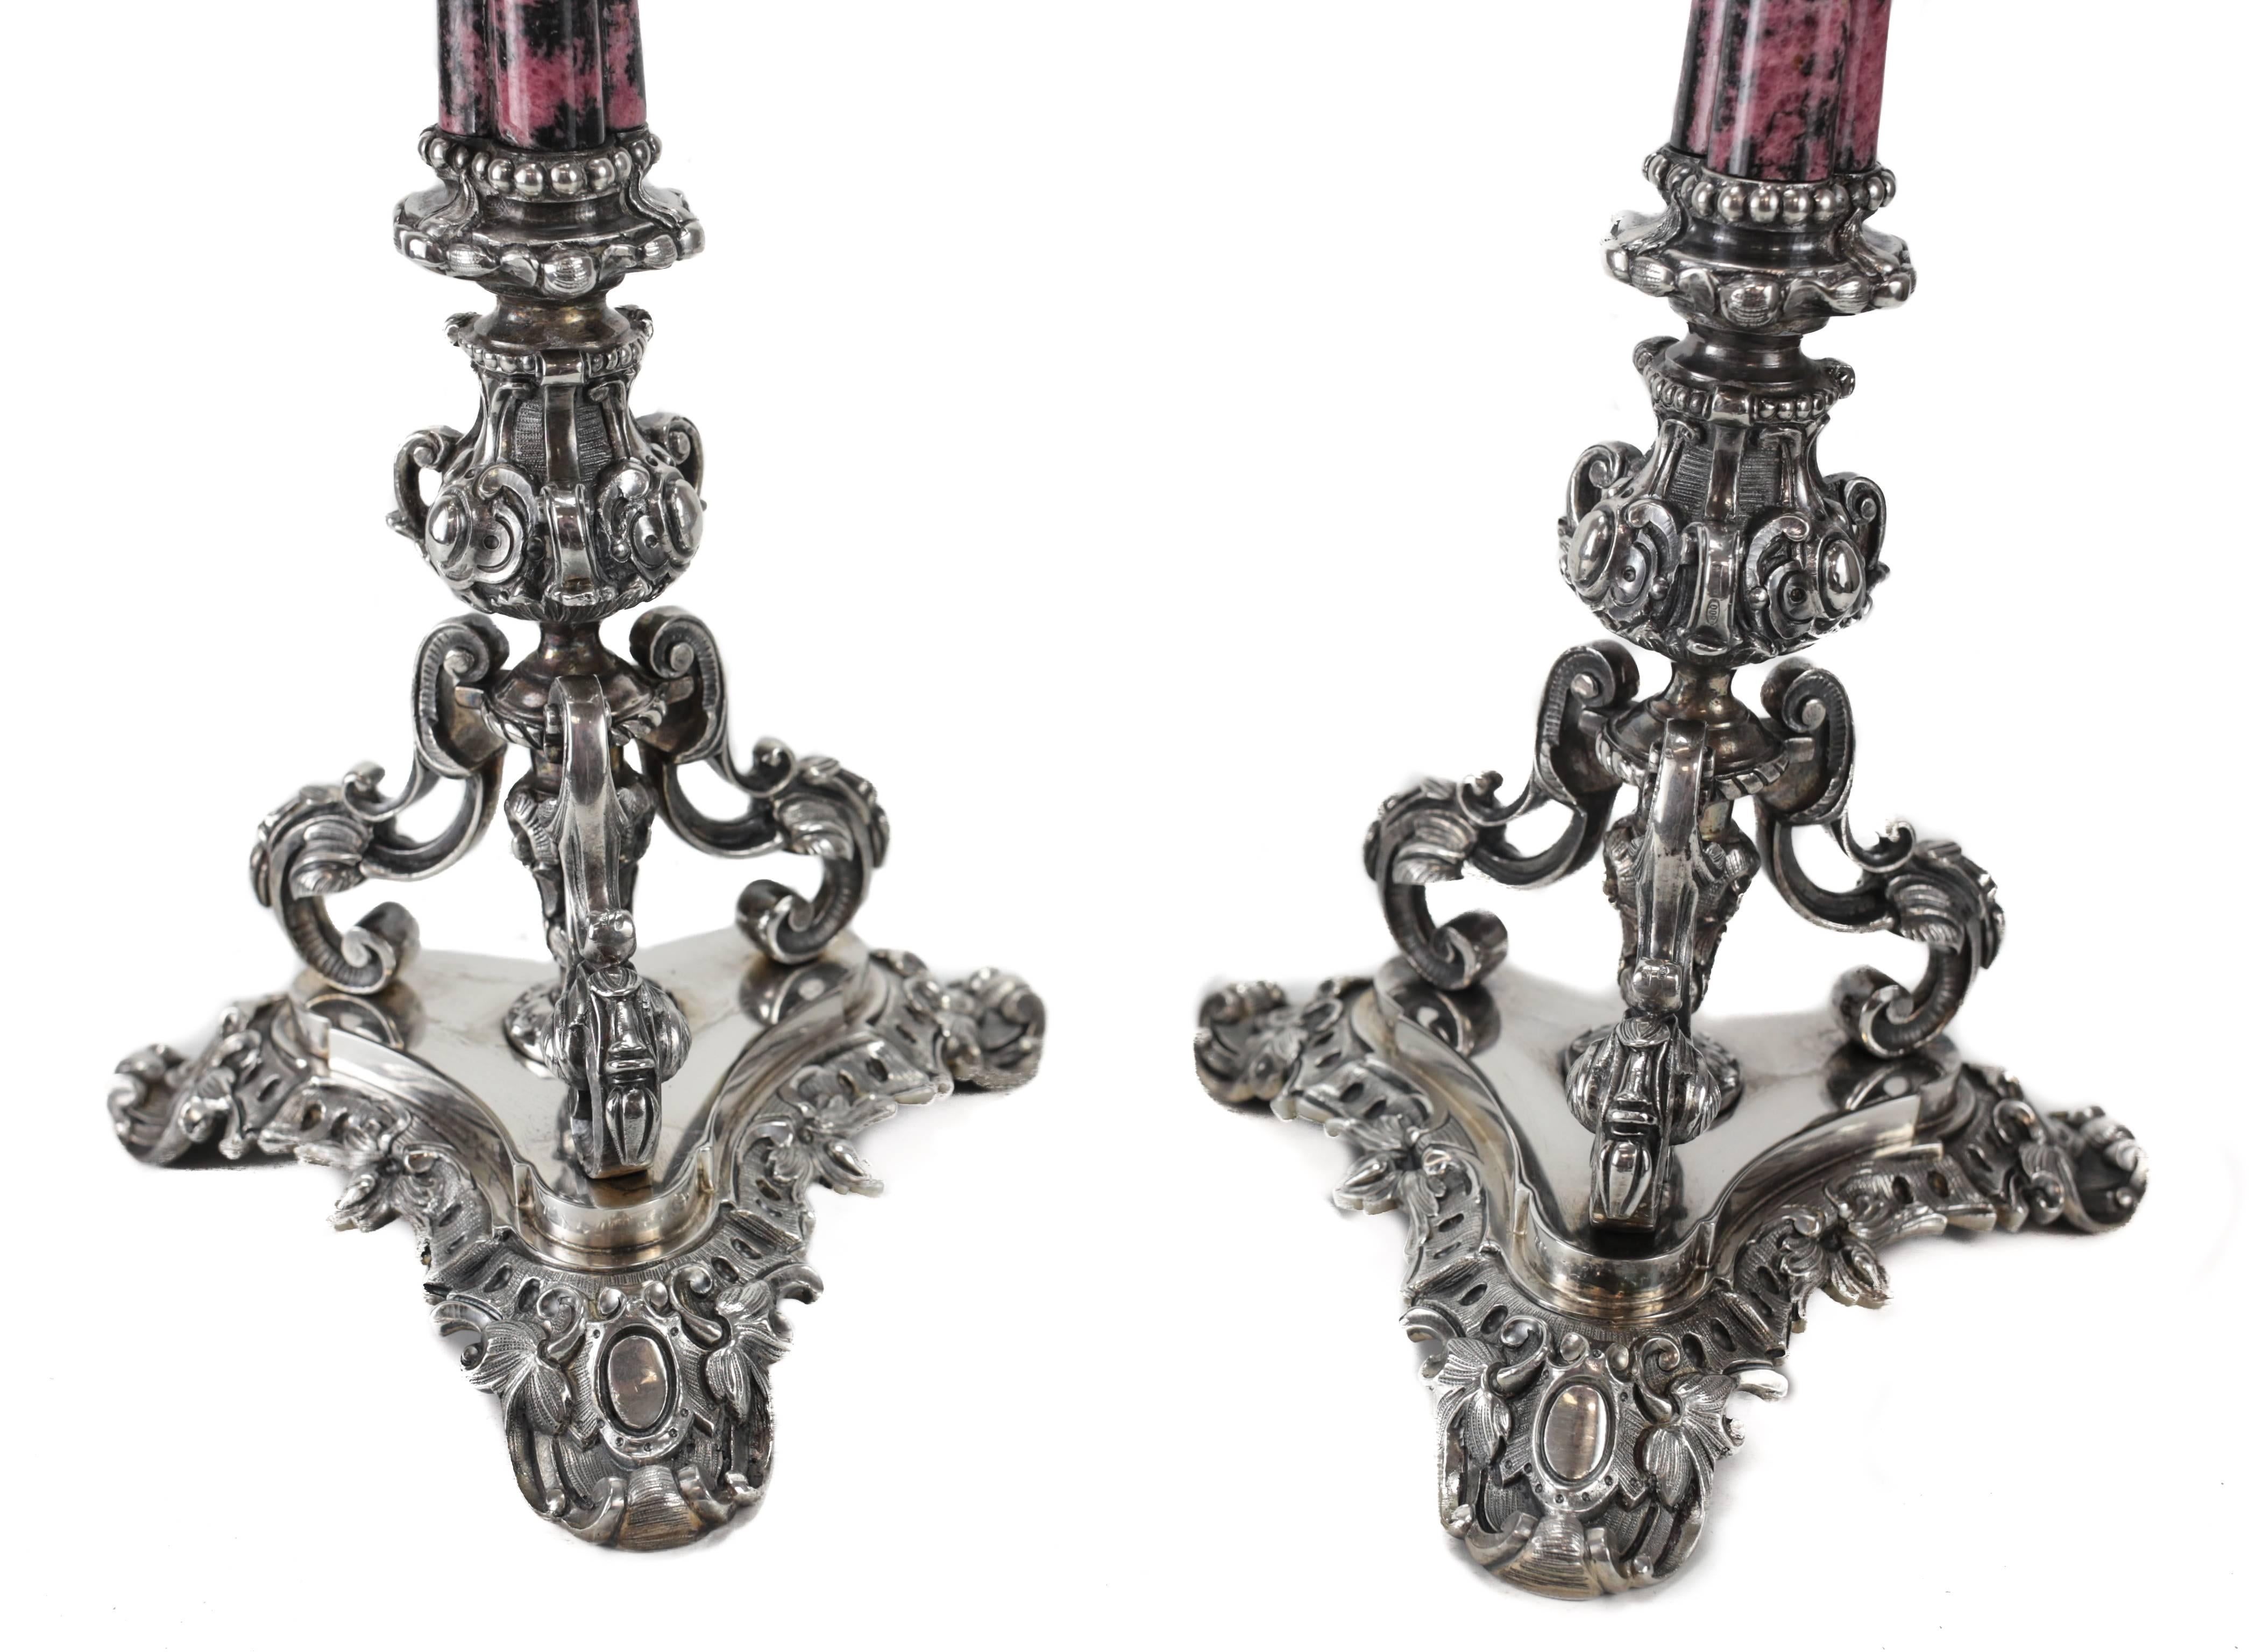 A large and magnificent pair of four-light candelabra crafted of .800 solid silver by Italian silversmith Ganci Carmelo di Giuseppe Morandino of Milan. Each candelabra with fine scrolled arms extended to each candle holder with a long stem of fine